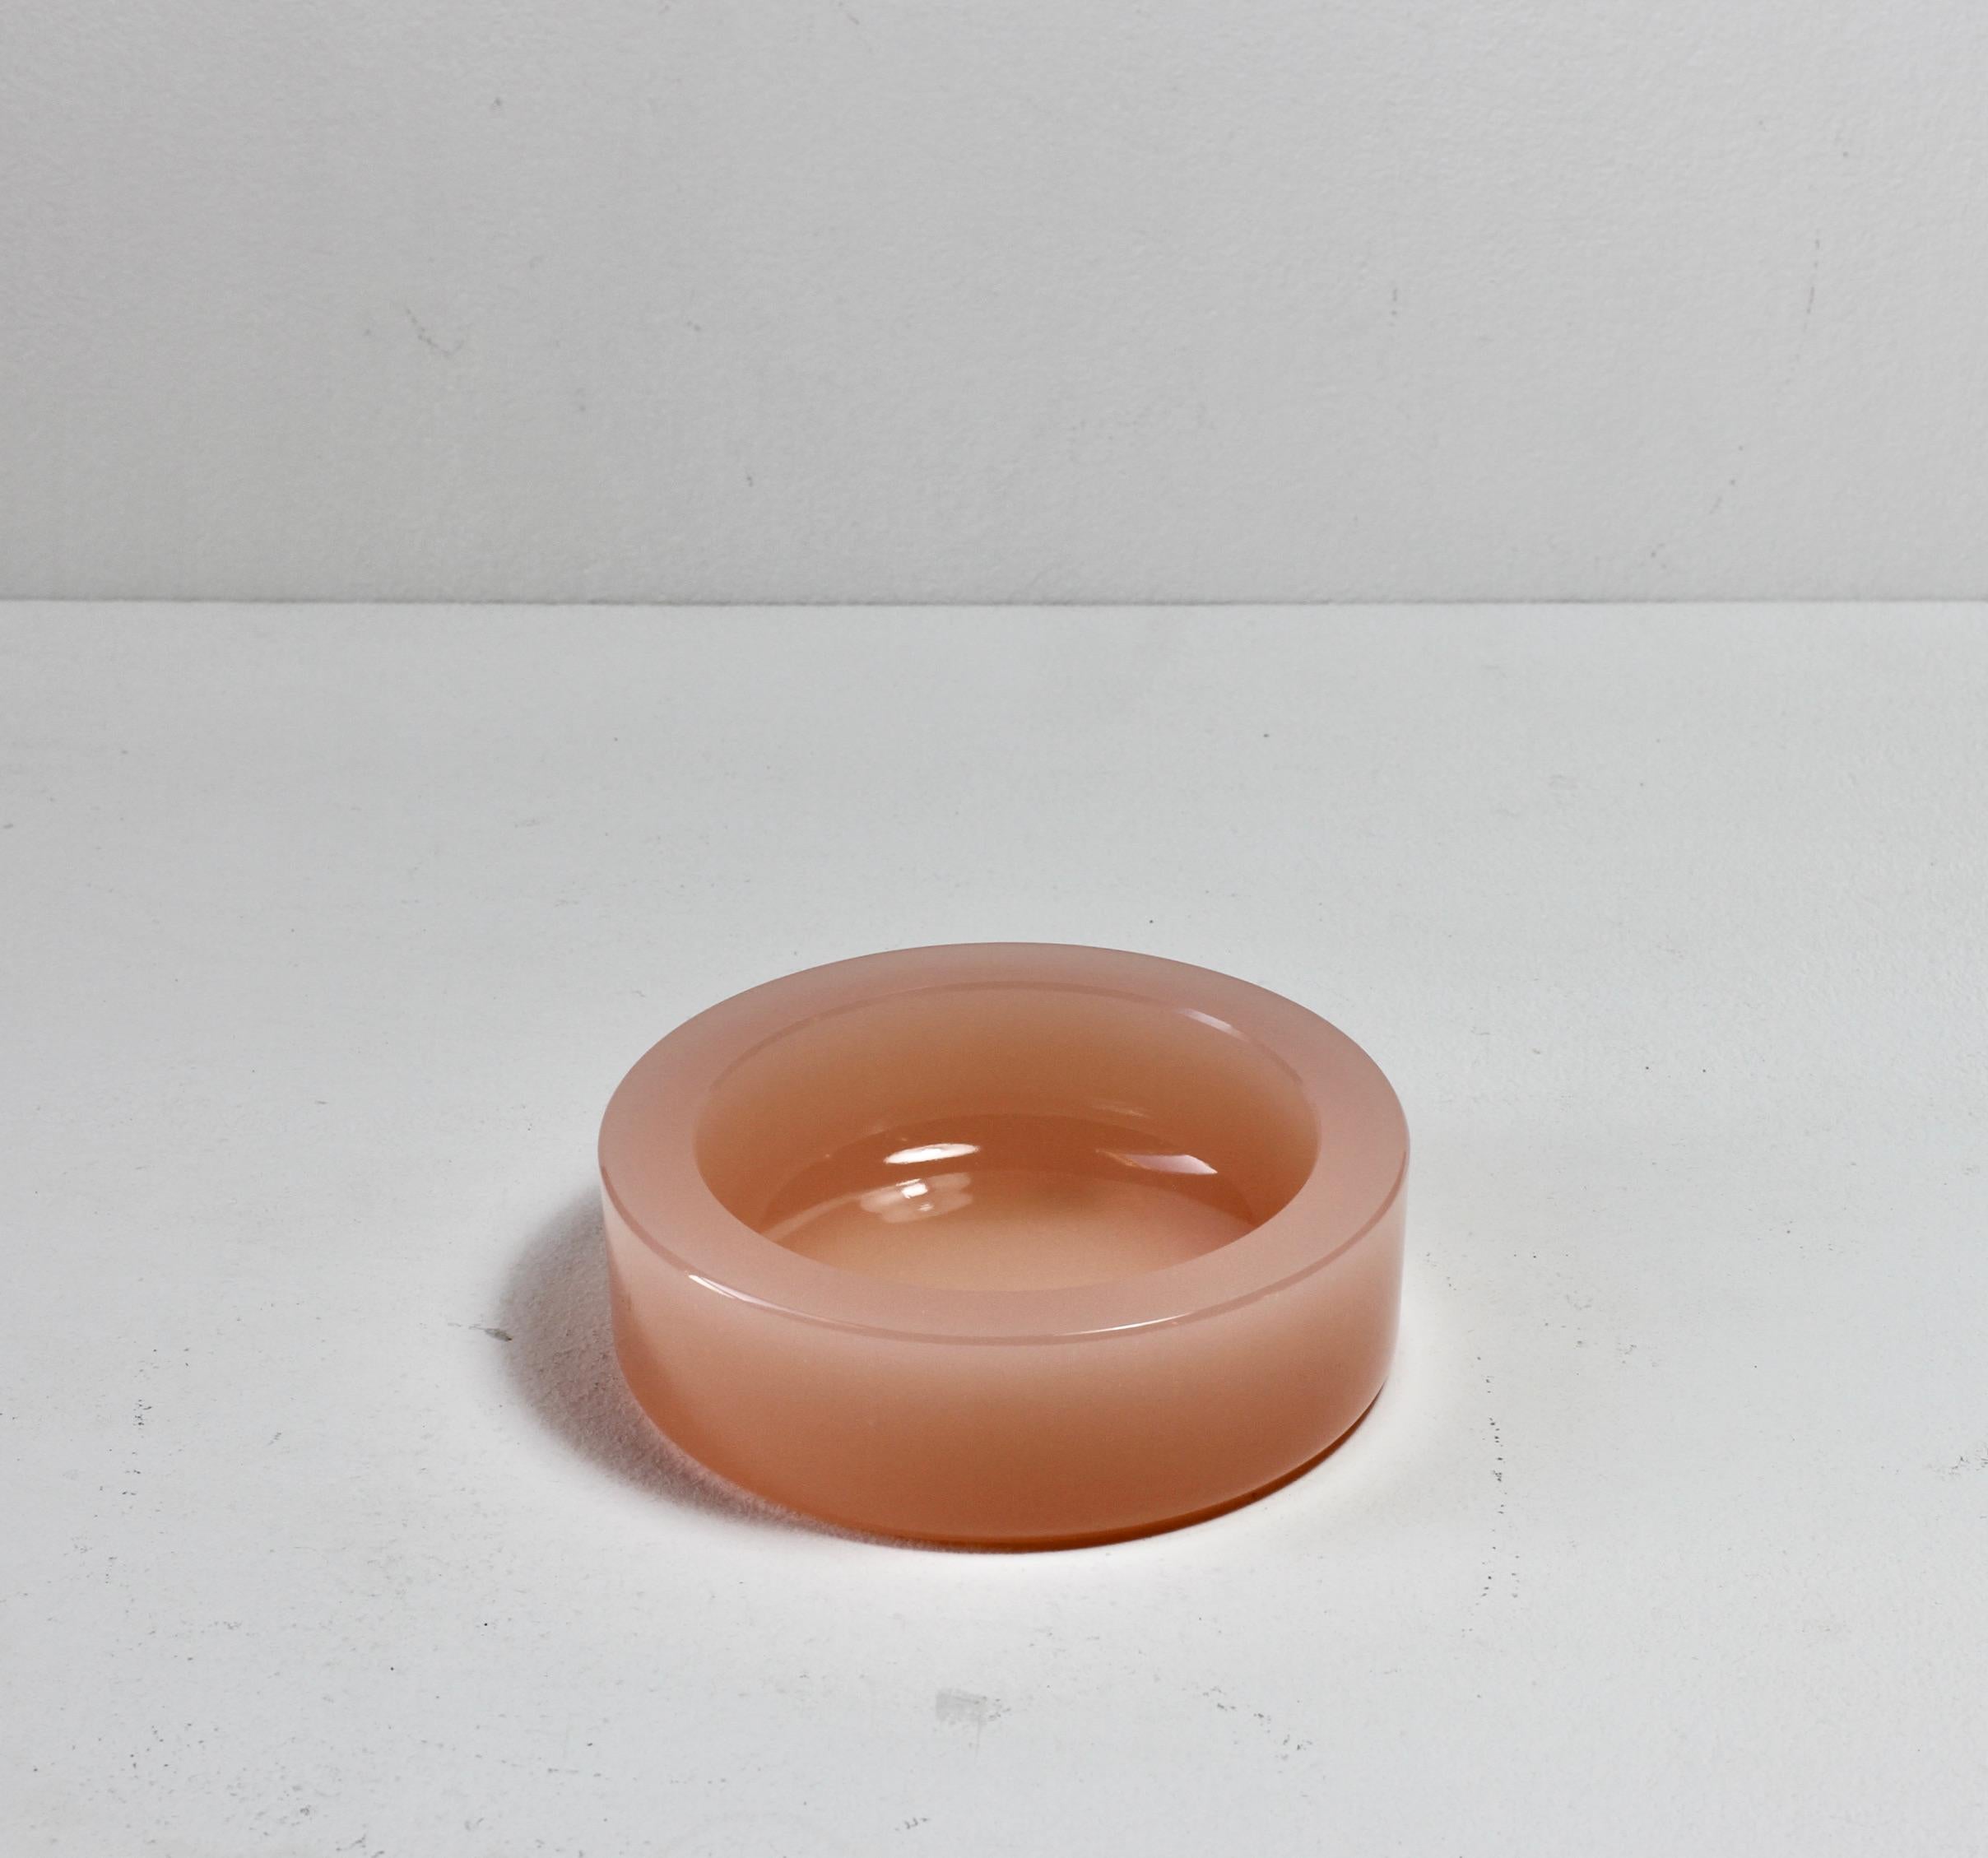 Blown Glass Cenedese Vintage. Venetian Pink Opaline Murano Glass Dish, Bowl or Ashtray 1970s For Sale